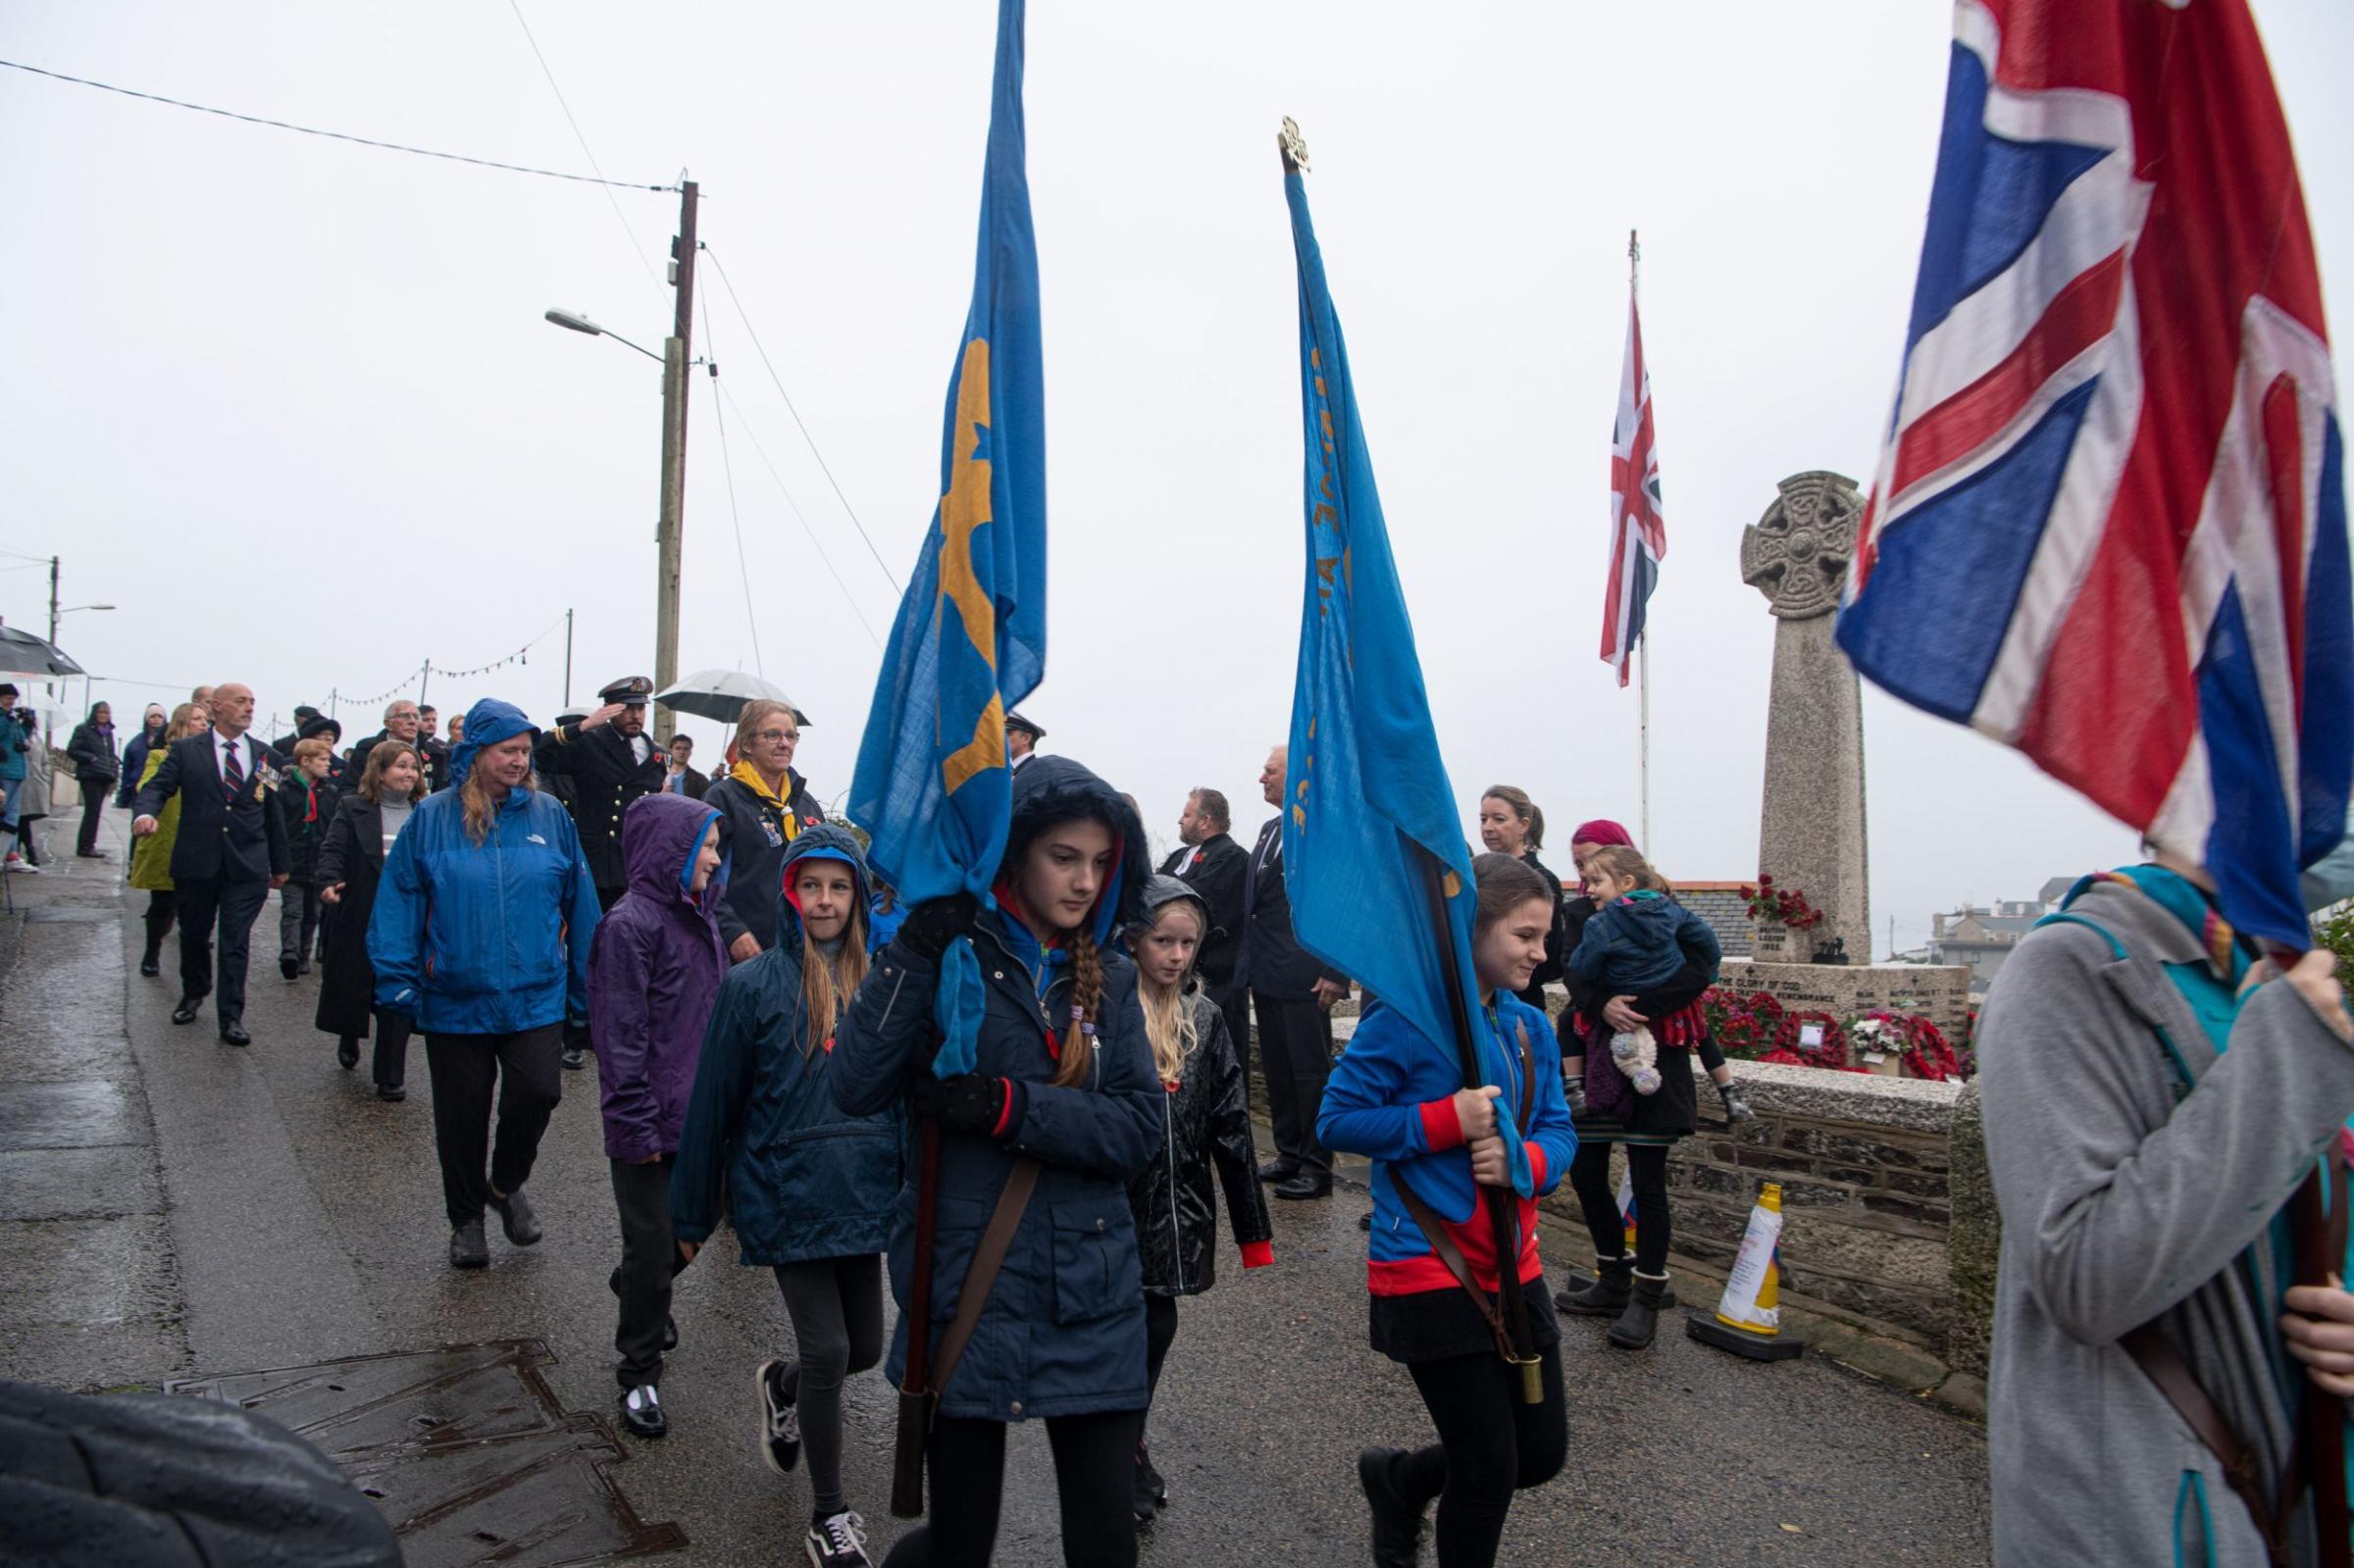 The parade to the War Memorial in Porthleven Picture: Kathy White